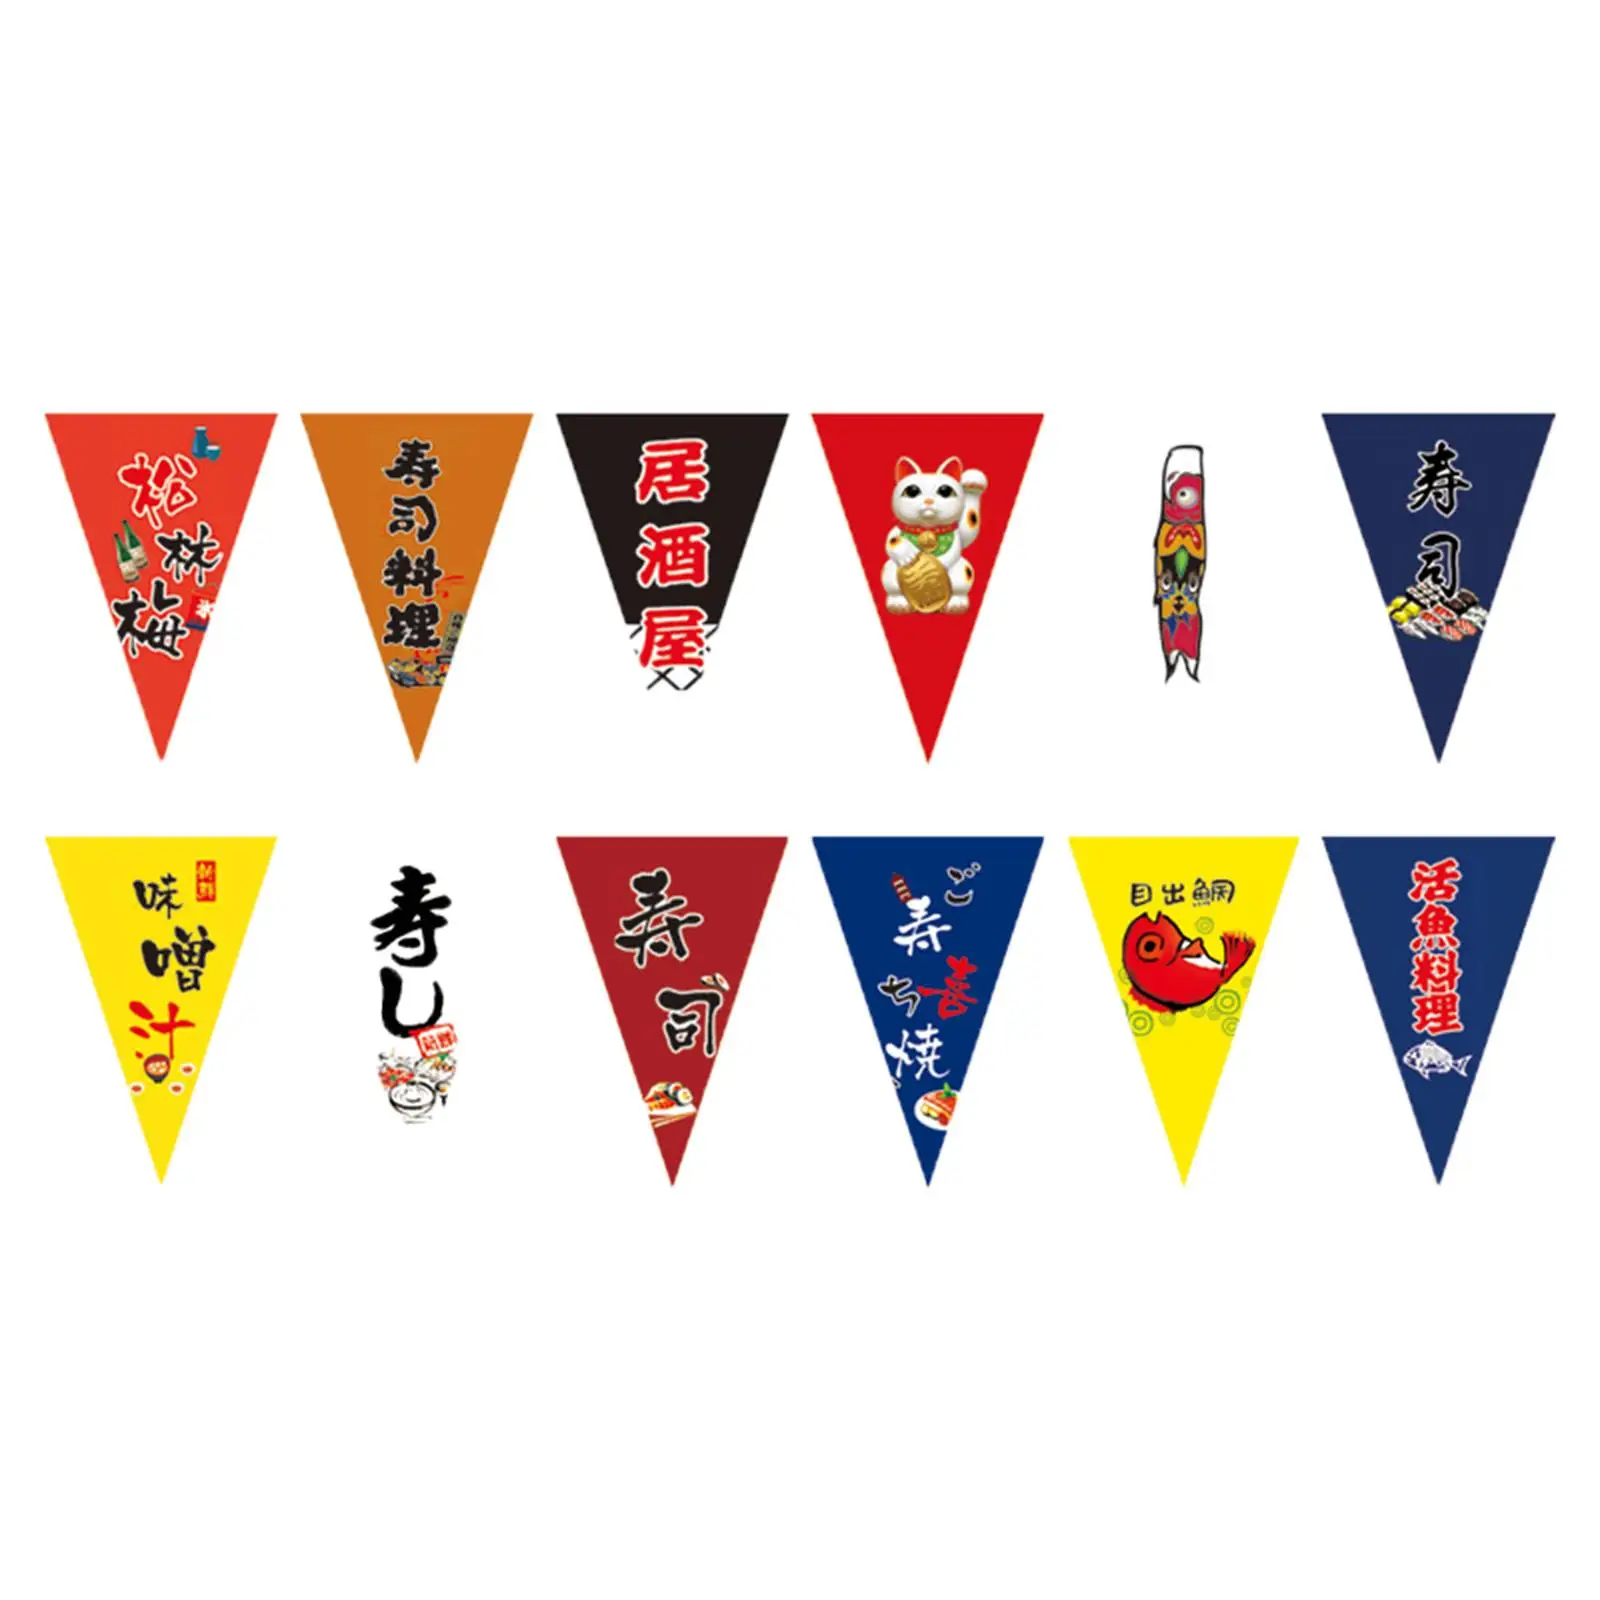 24 Flags Sushi Banner Triangle Flag Bunting for Festival Restaurant Sushi